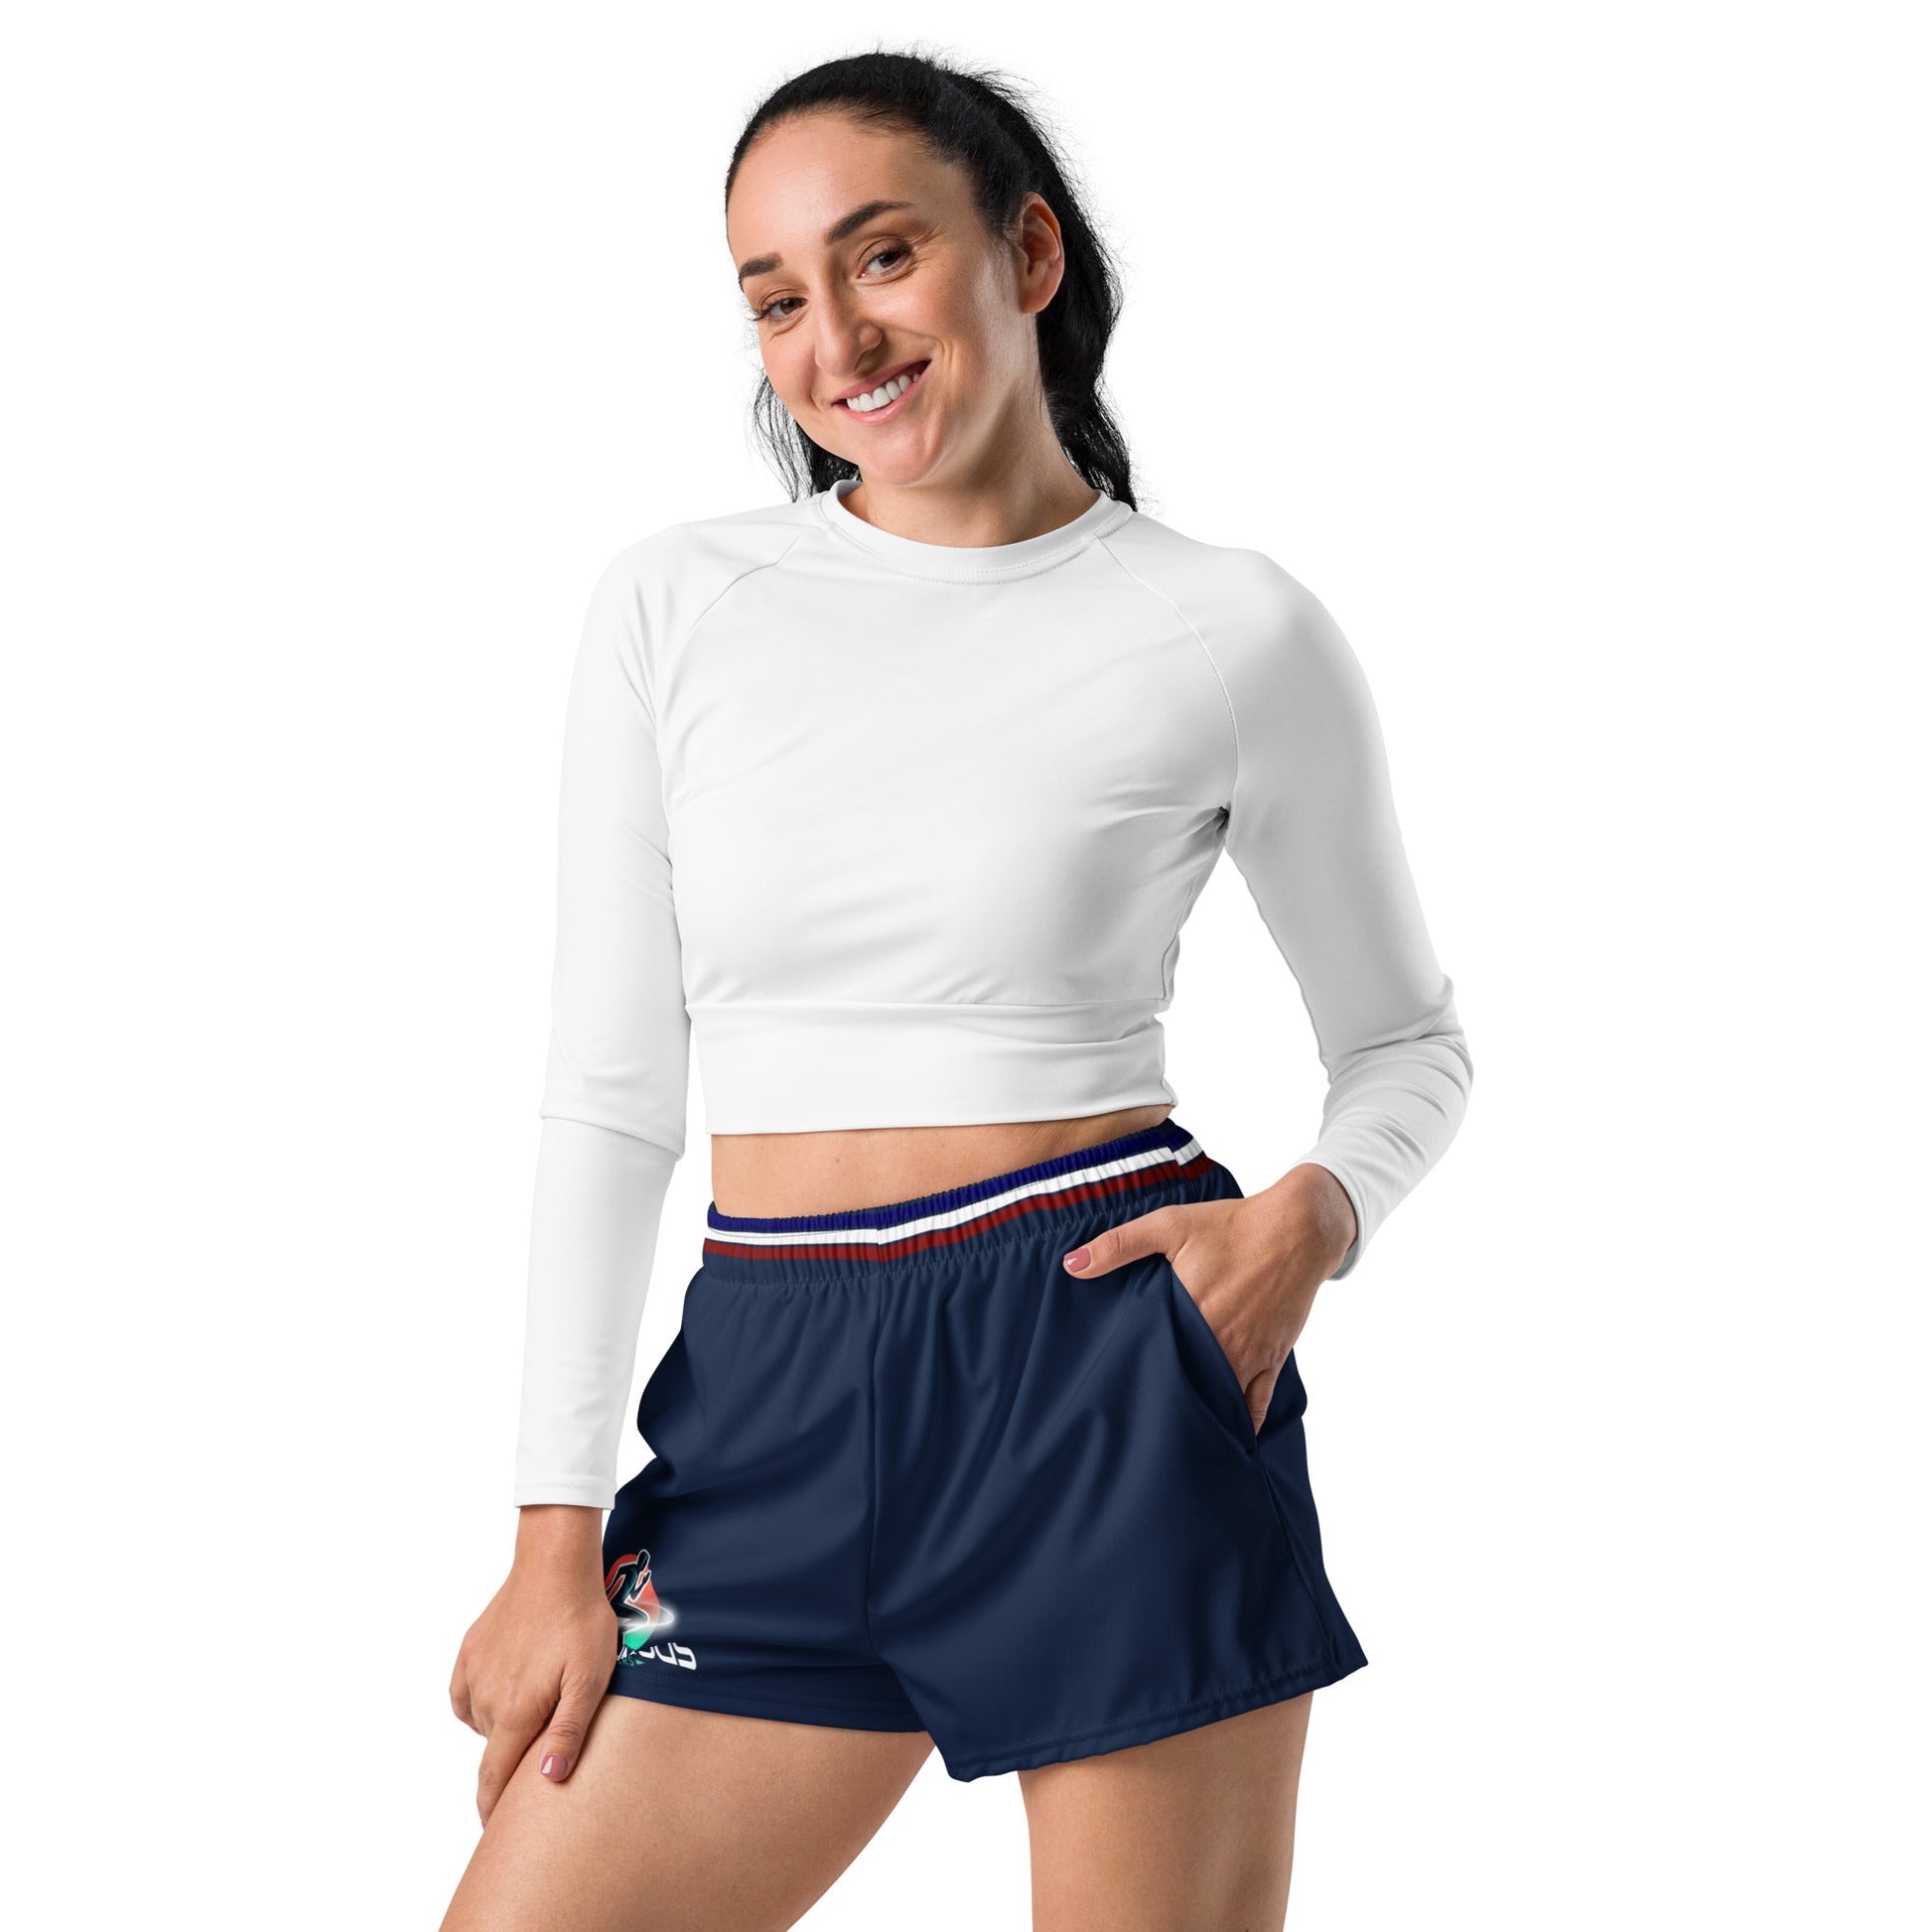 Short Femme Anonymous Runners - Le Traileur Anonyme